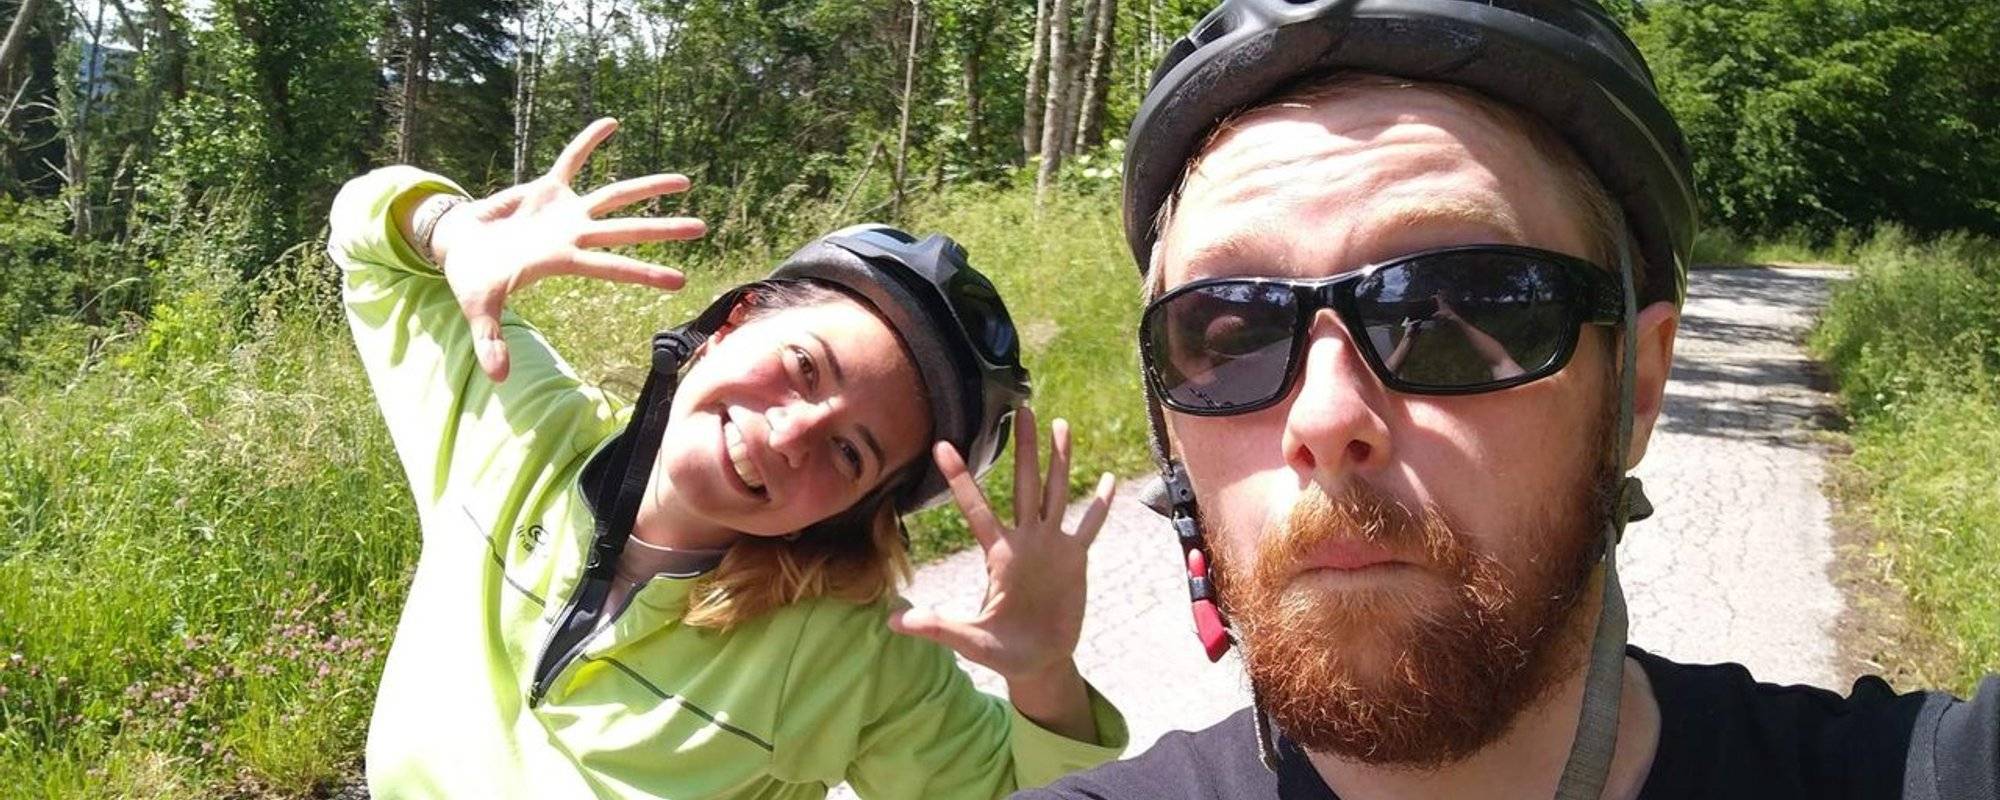 Cycle adventure across Europe #2: I guess we are criminals? 